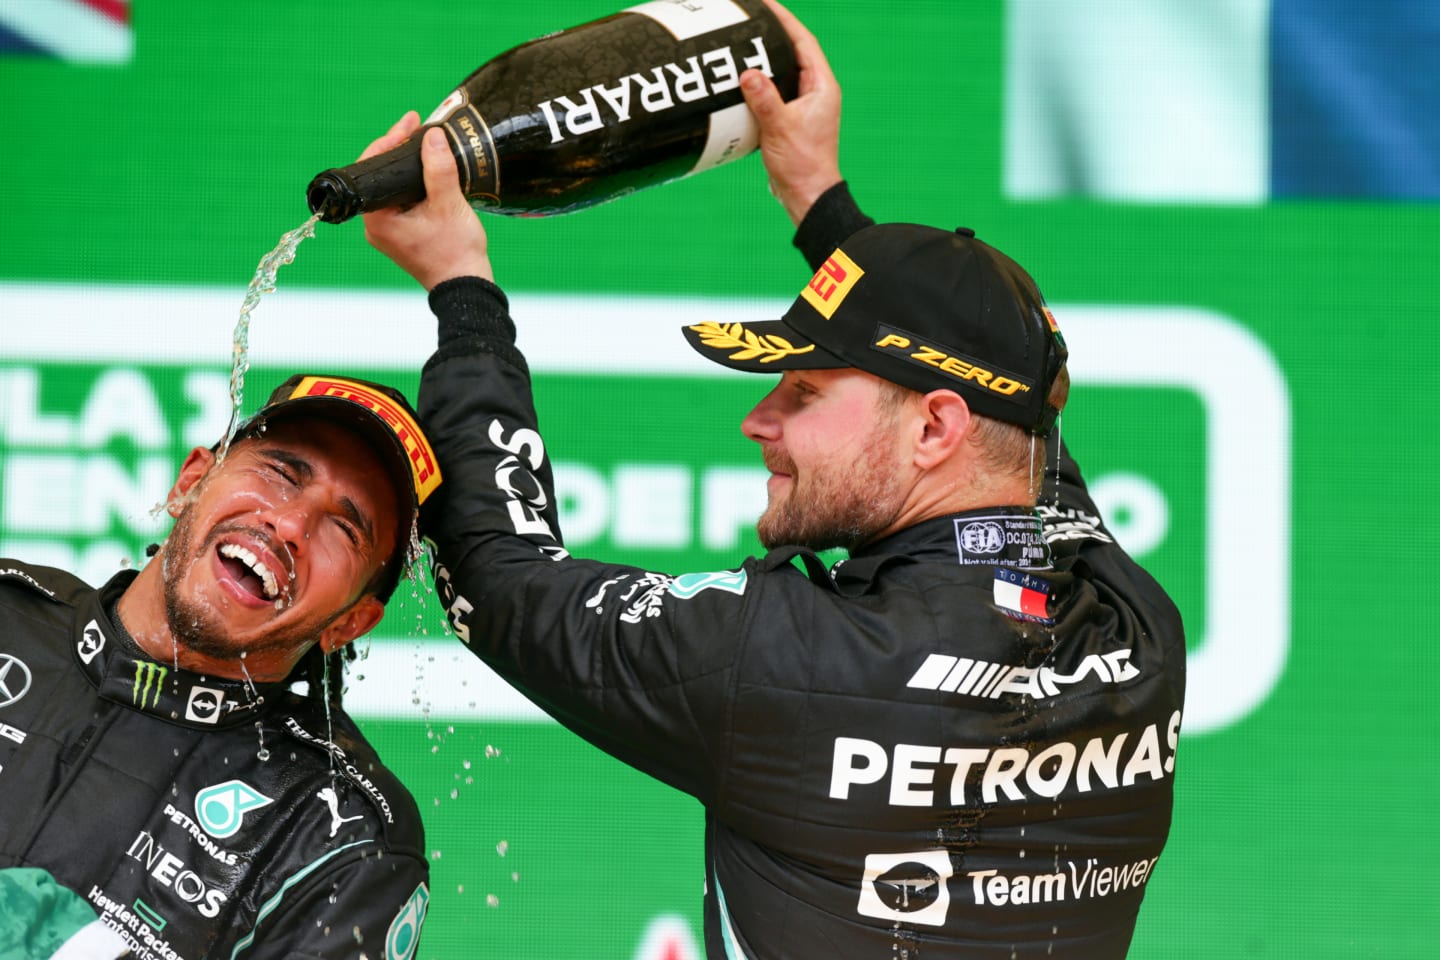 SAO PAULO, BRAZIL - NOVEMBER 14: Lewis Hamilton of Mercedes and Great Britain and Valterri Bottas of Mercedes and Finland celebrate finishing in first and third positions during the F1 Grand Prix of Brazil at Autodromo Jose Carlos Pace on November 14, 2021 in Sao Paulo, Brazil. (Photo by Peter Fox/Getty Images)